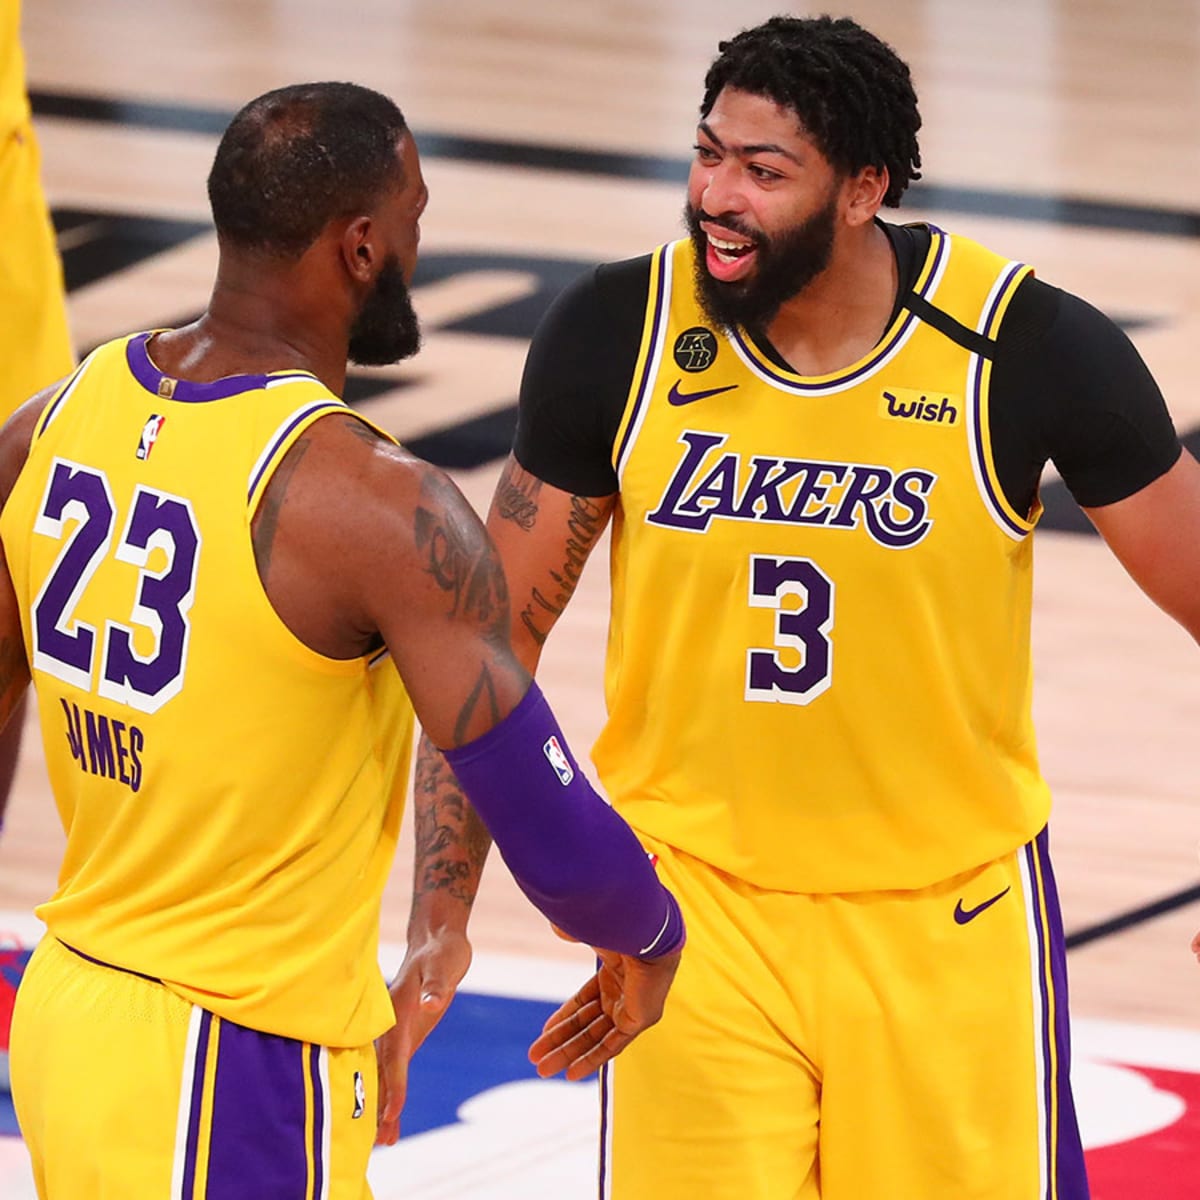 Lakers' LeBron James giving No. 23 jersey number to Anthony Davis